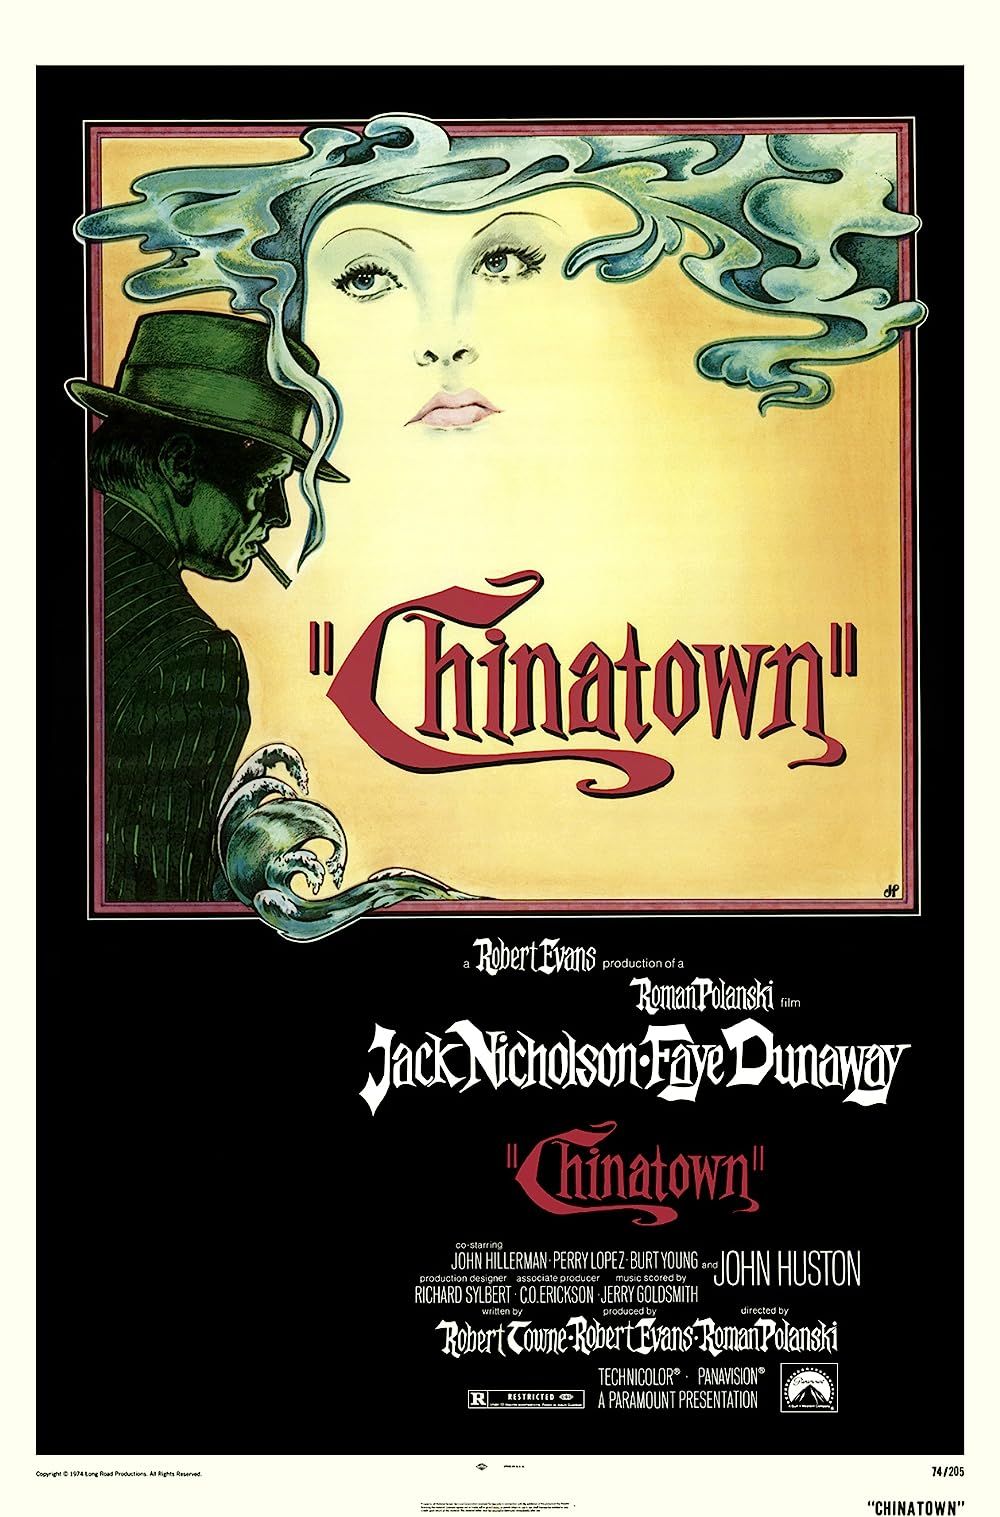 An illustration of Jack Nicolson on the cover of a Chinatown poster